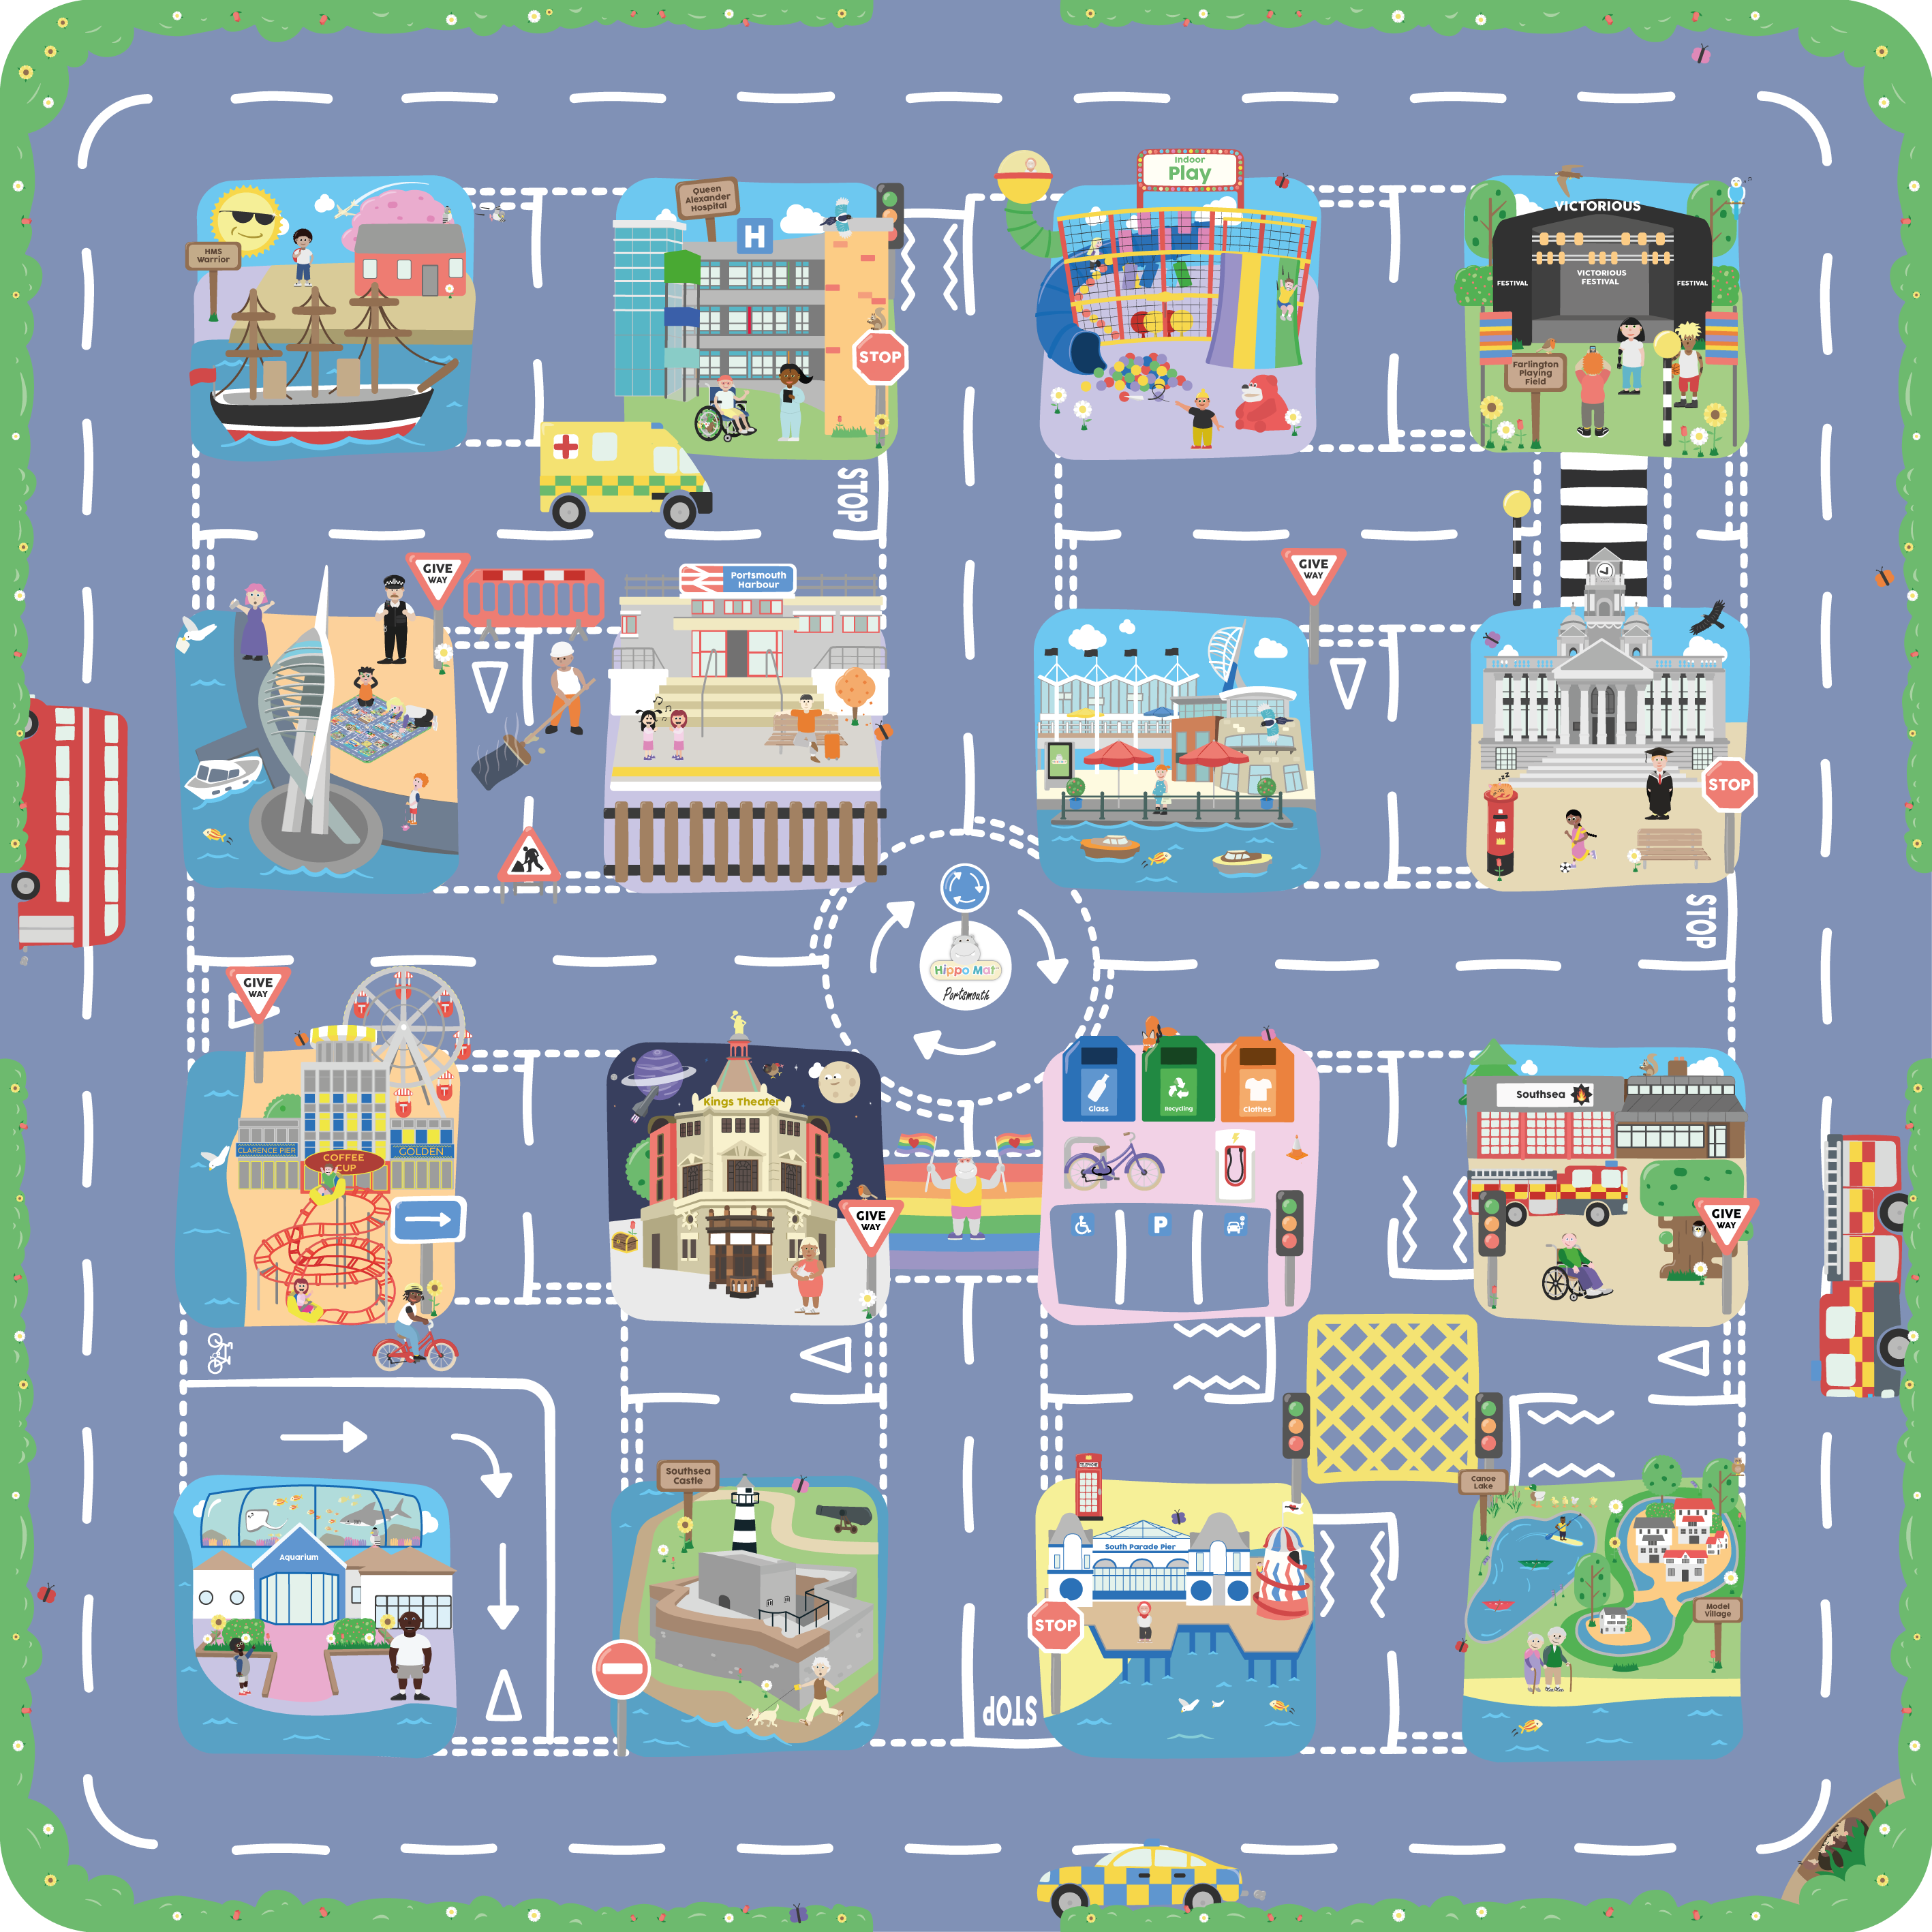 <a href="https://hippomat.uk/portsmouth-hippo-mat/">Click here to pre-order your Portsmouth Hippo Mat™</a>